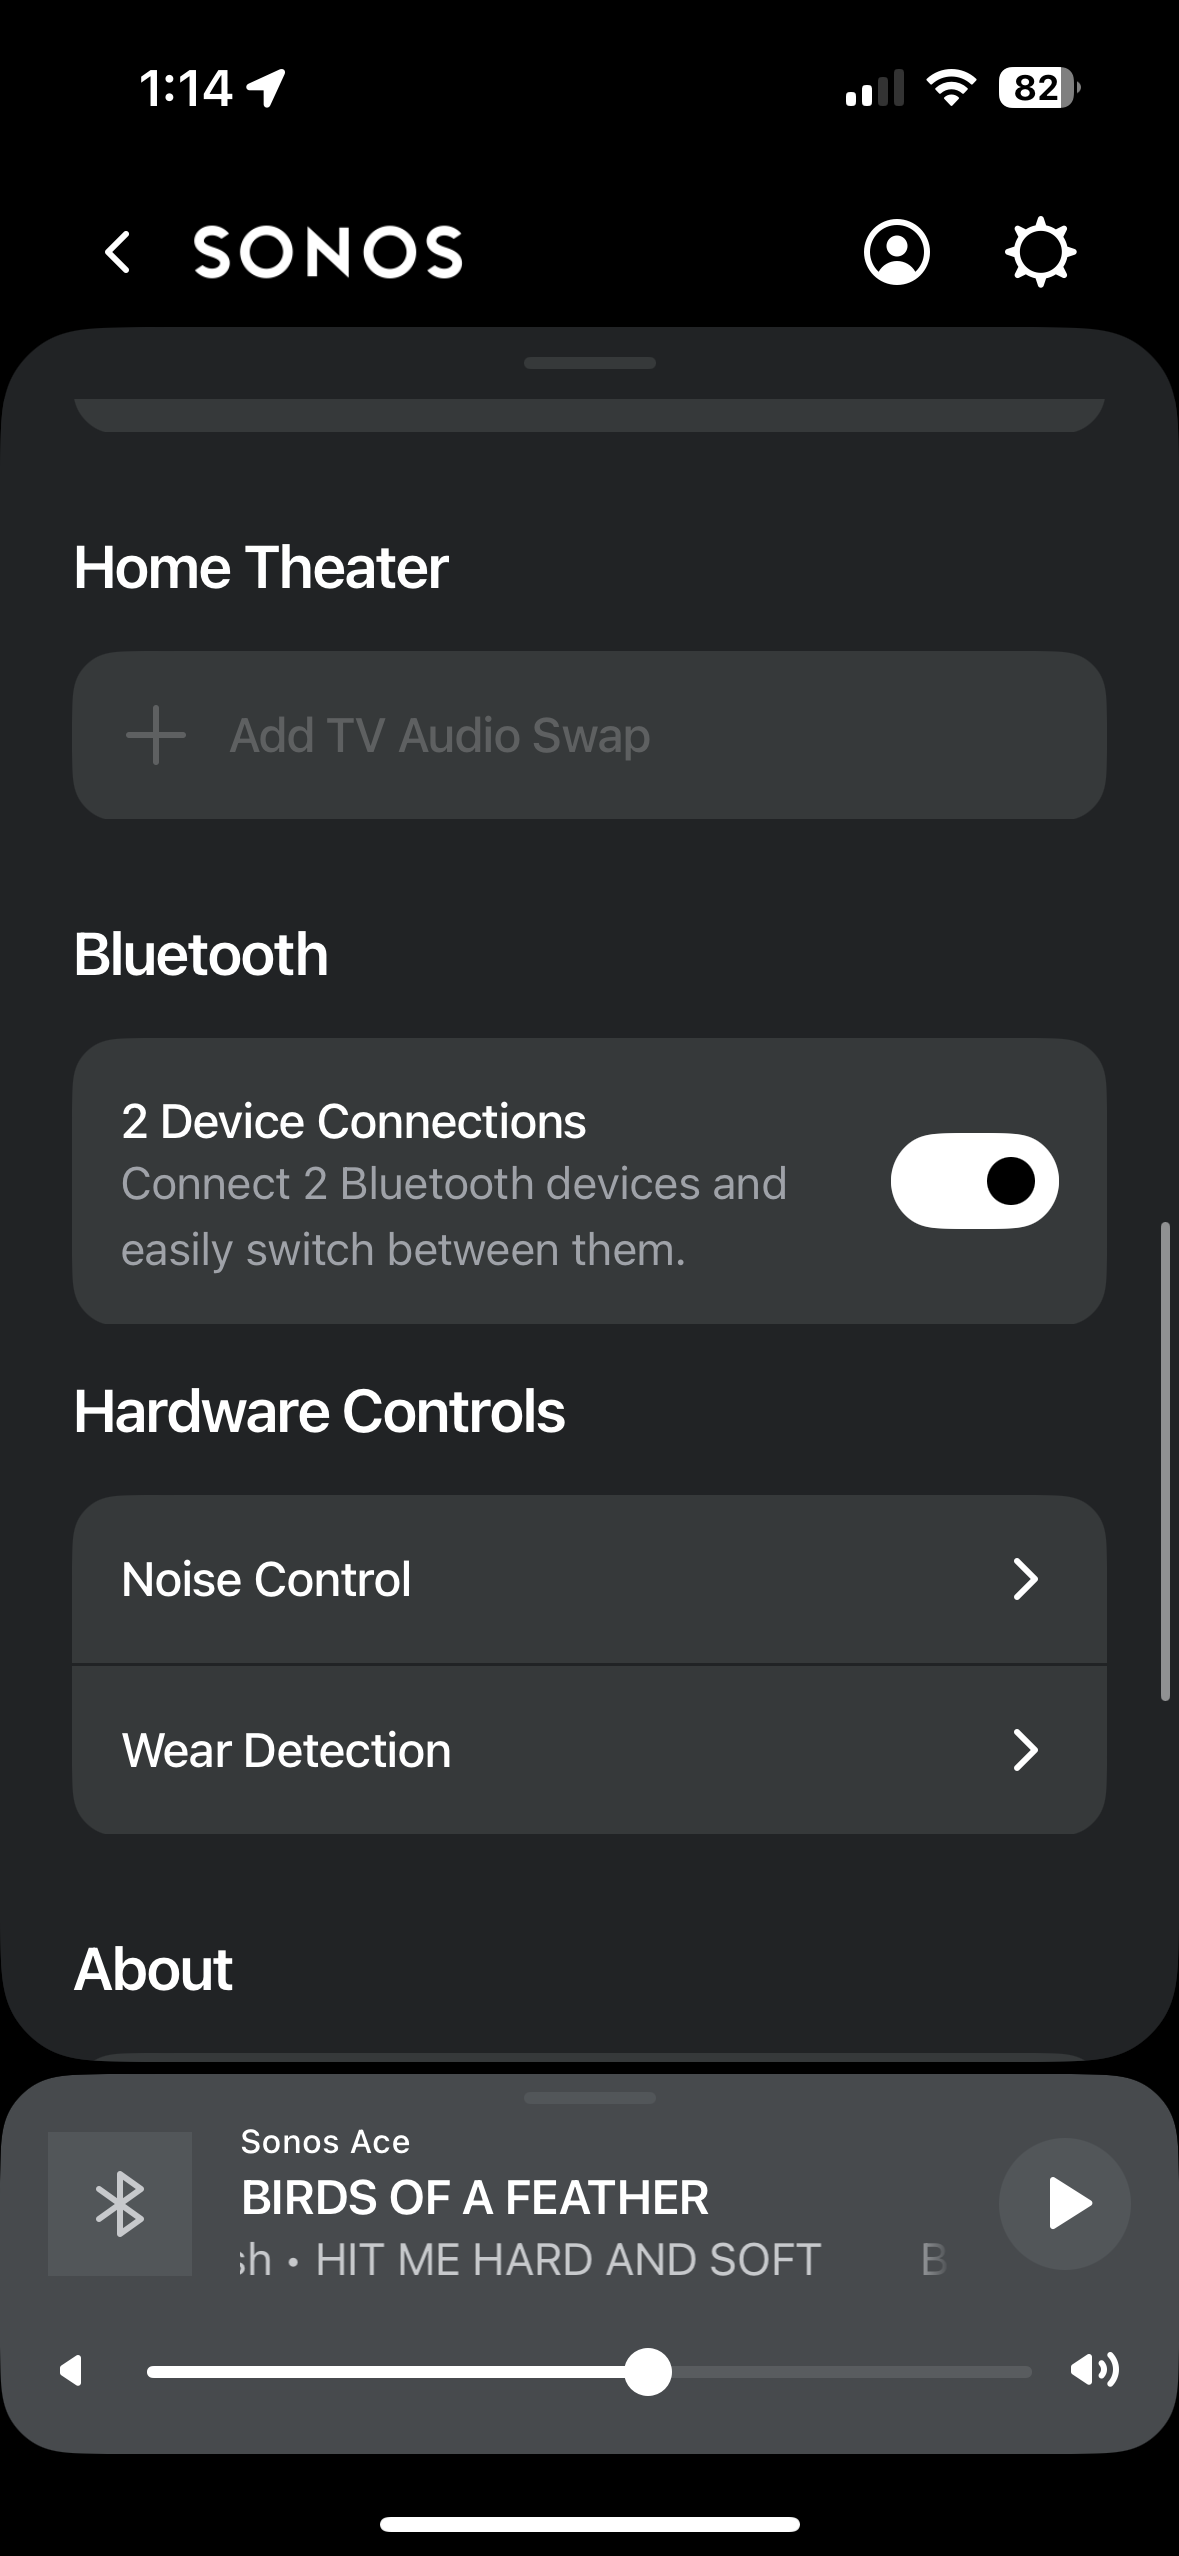 Sonos app interface showing the home theater, Bluetooth, and Hardware Control options for the Sonos Ace headphones.